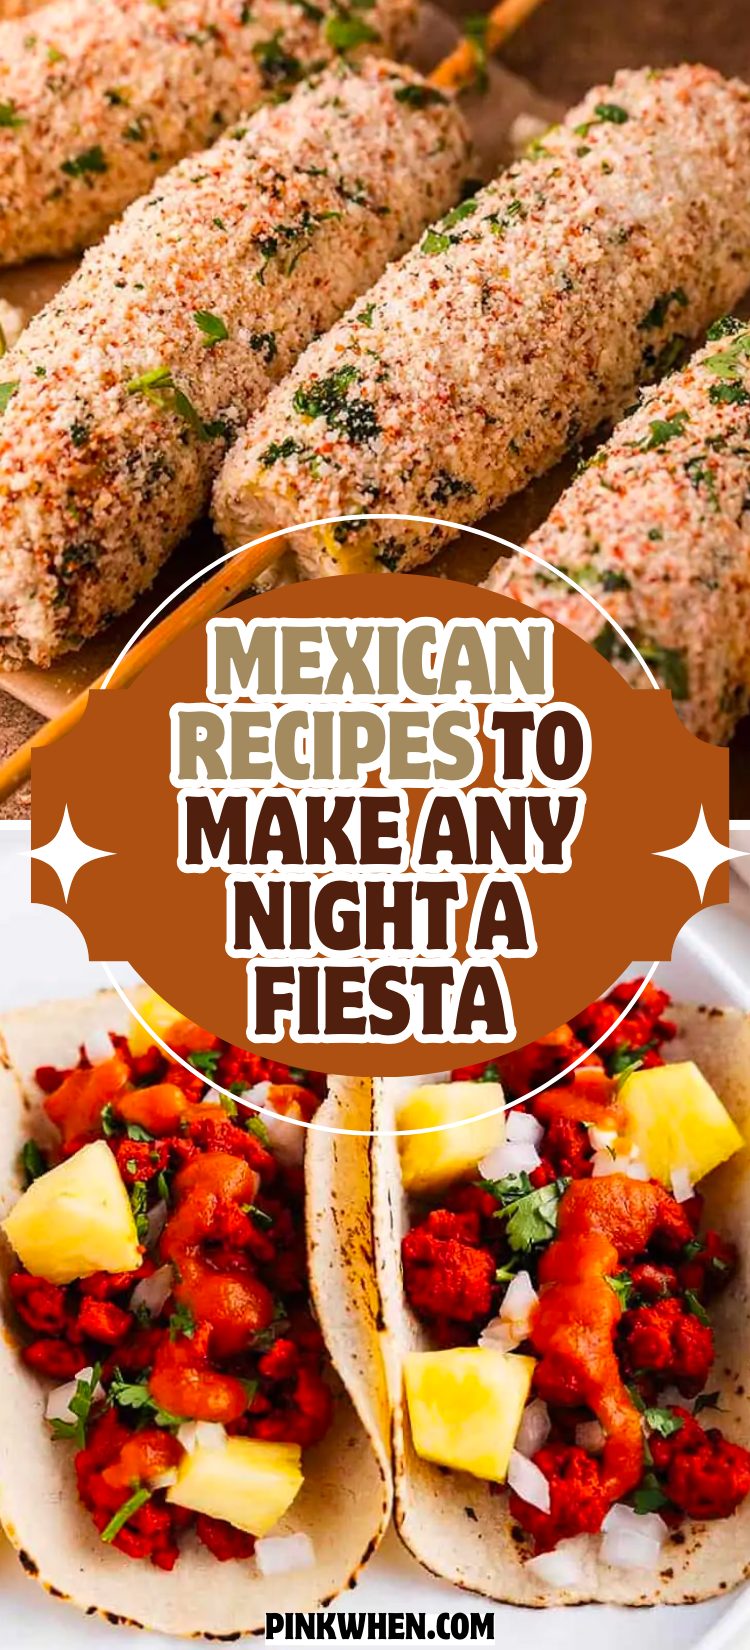 Mexican Recipes to Make Any Night a Fiesta